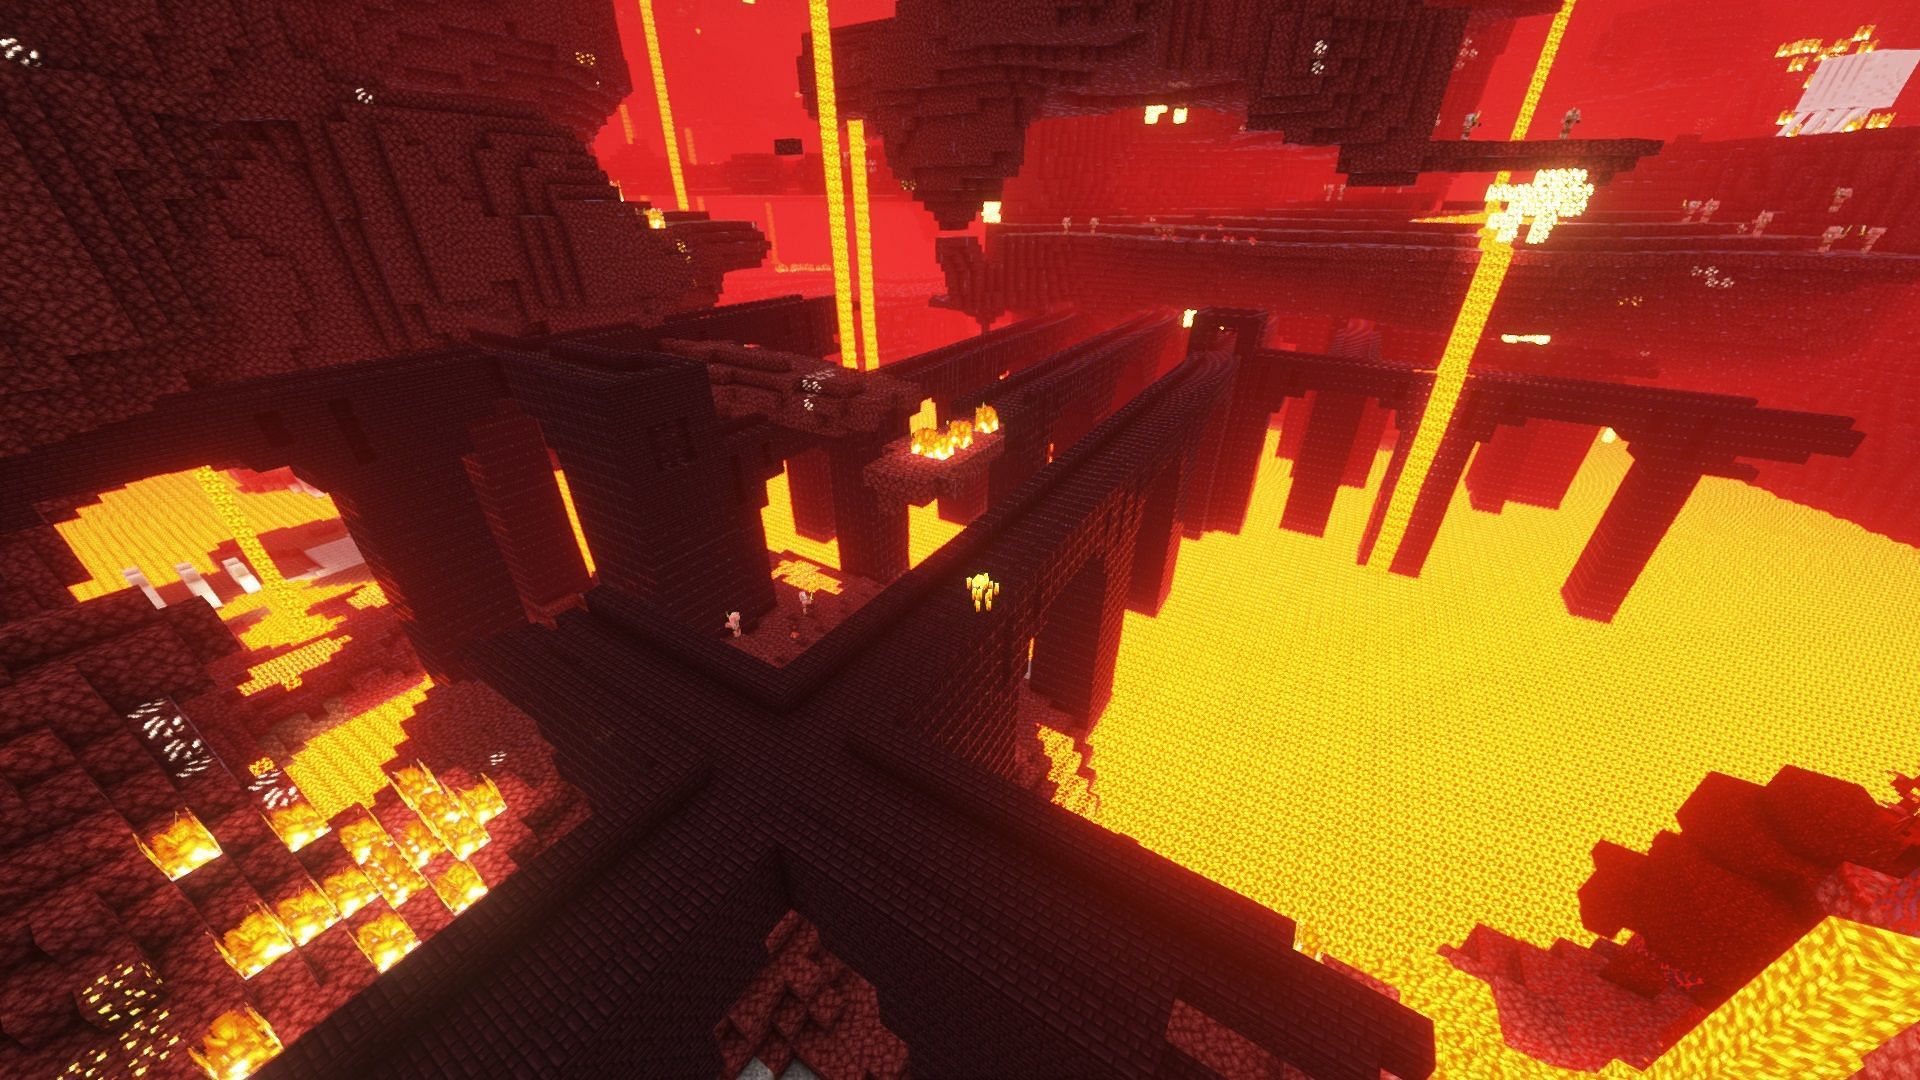 Nether Fortress in Minecraft